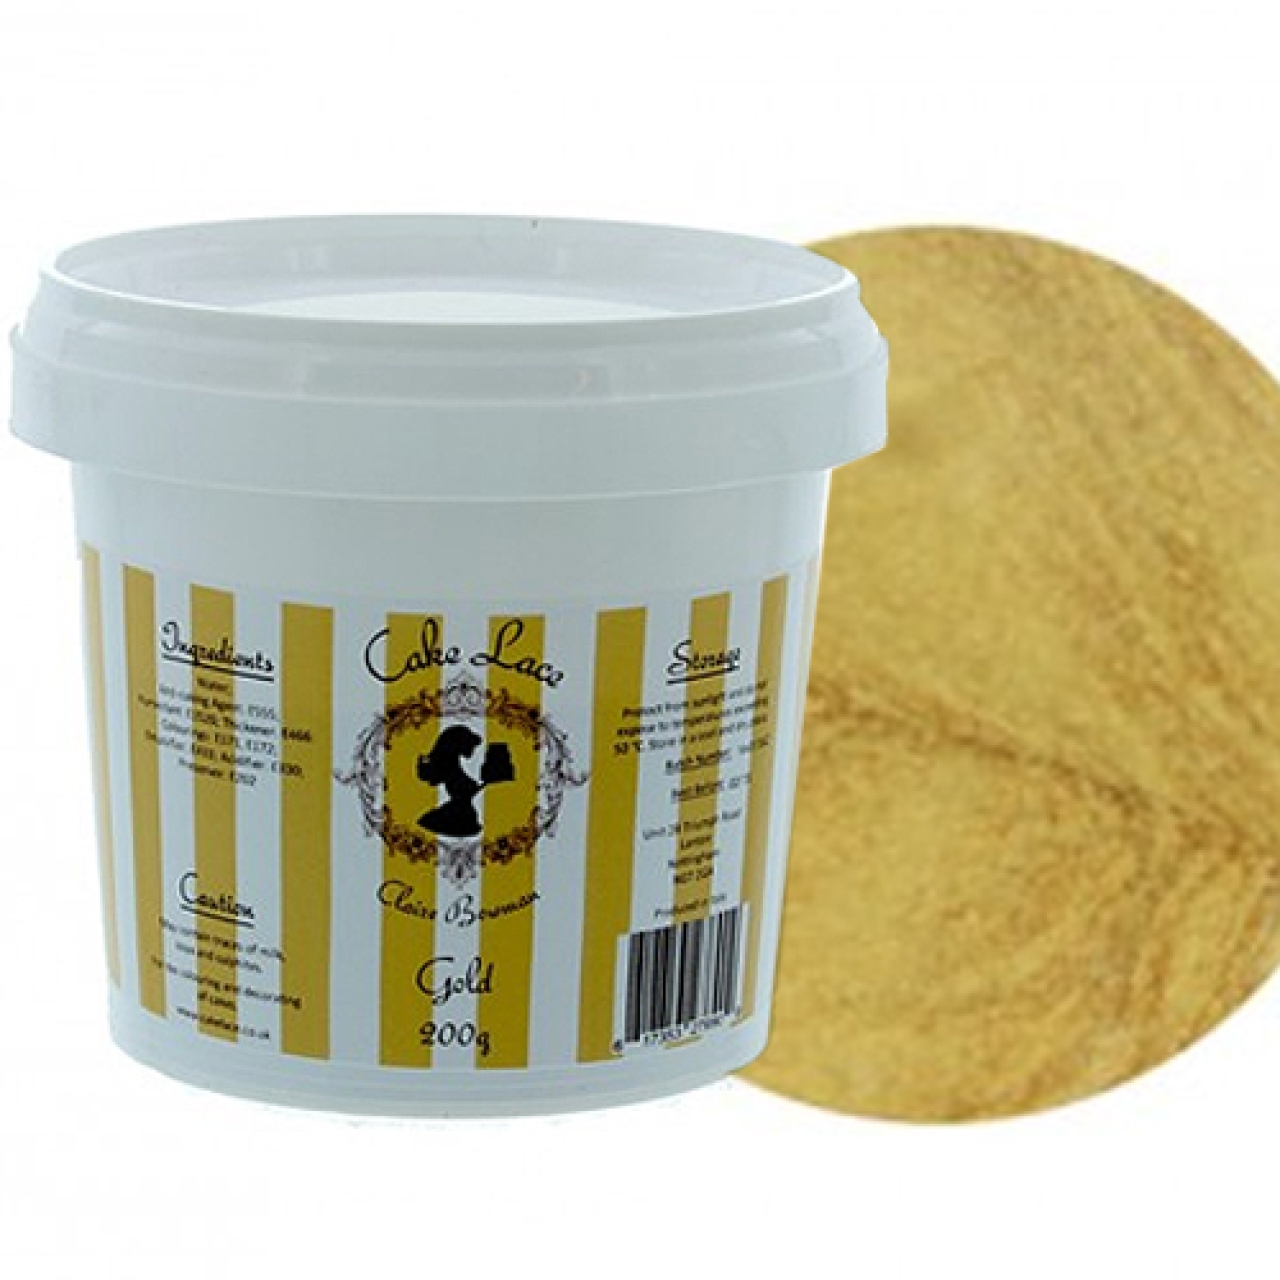 Cake Lace Royal Icing Mischung gold, vorgemischt 500 g